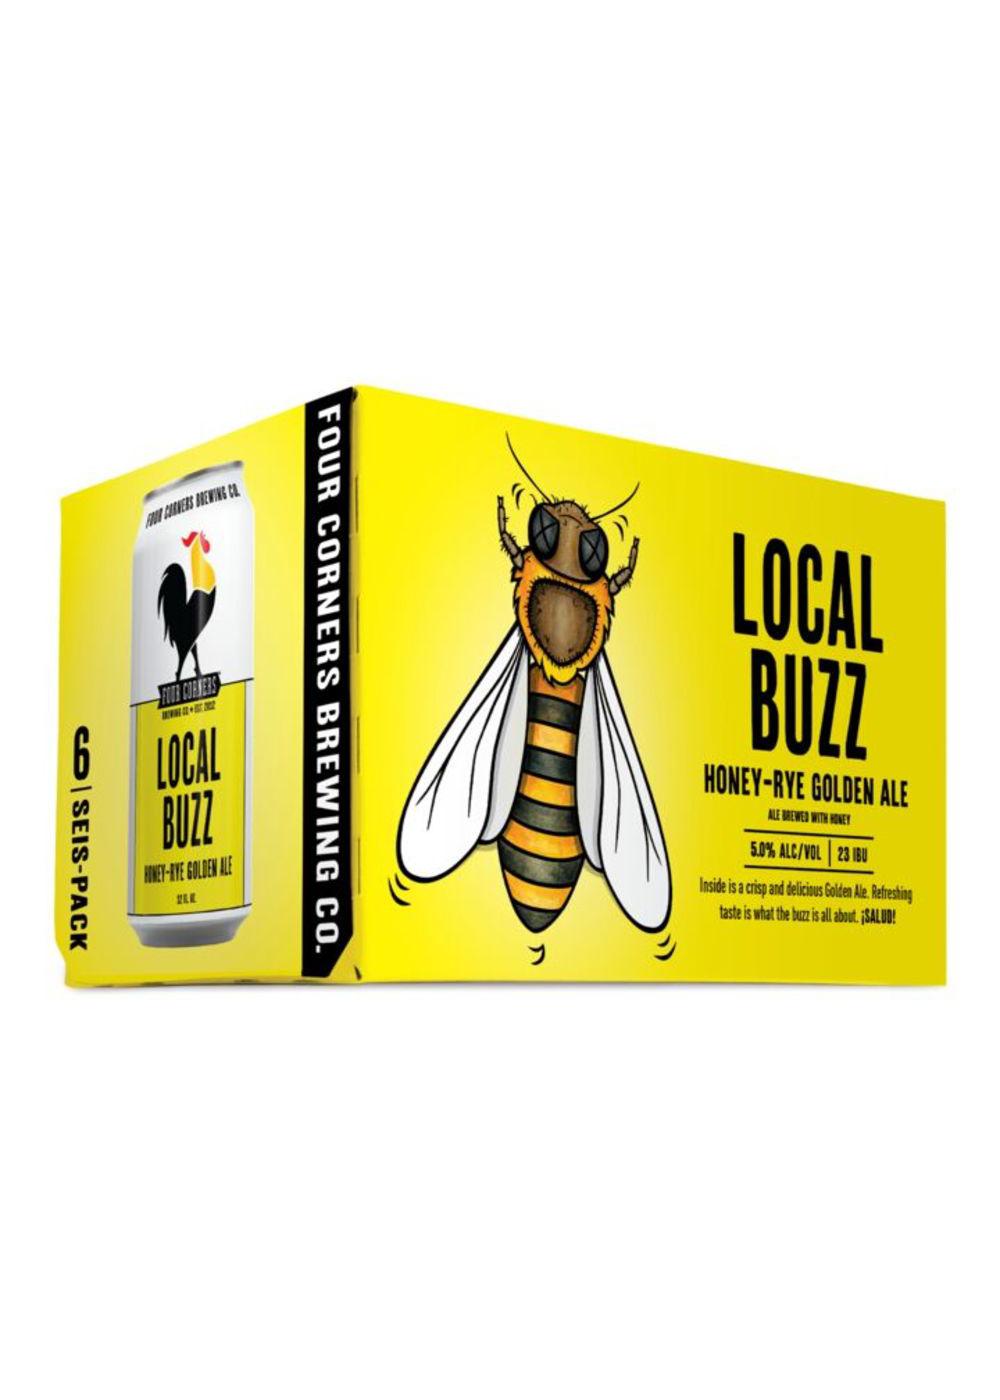 Four Corners Local Buzz Golden Ale Craft Beer 6 pk Cans; image 1 of 4